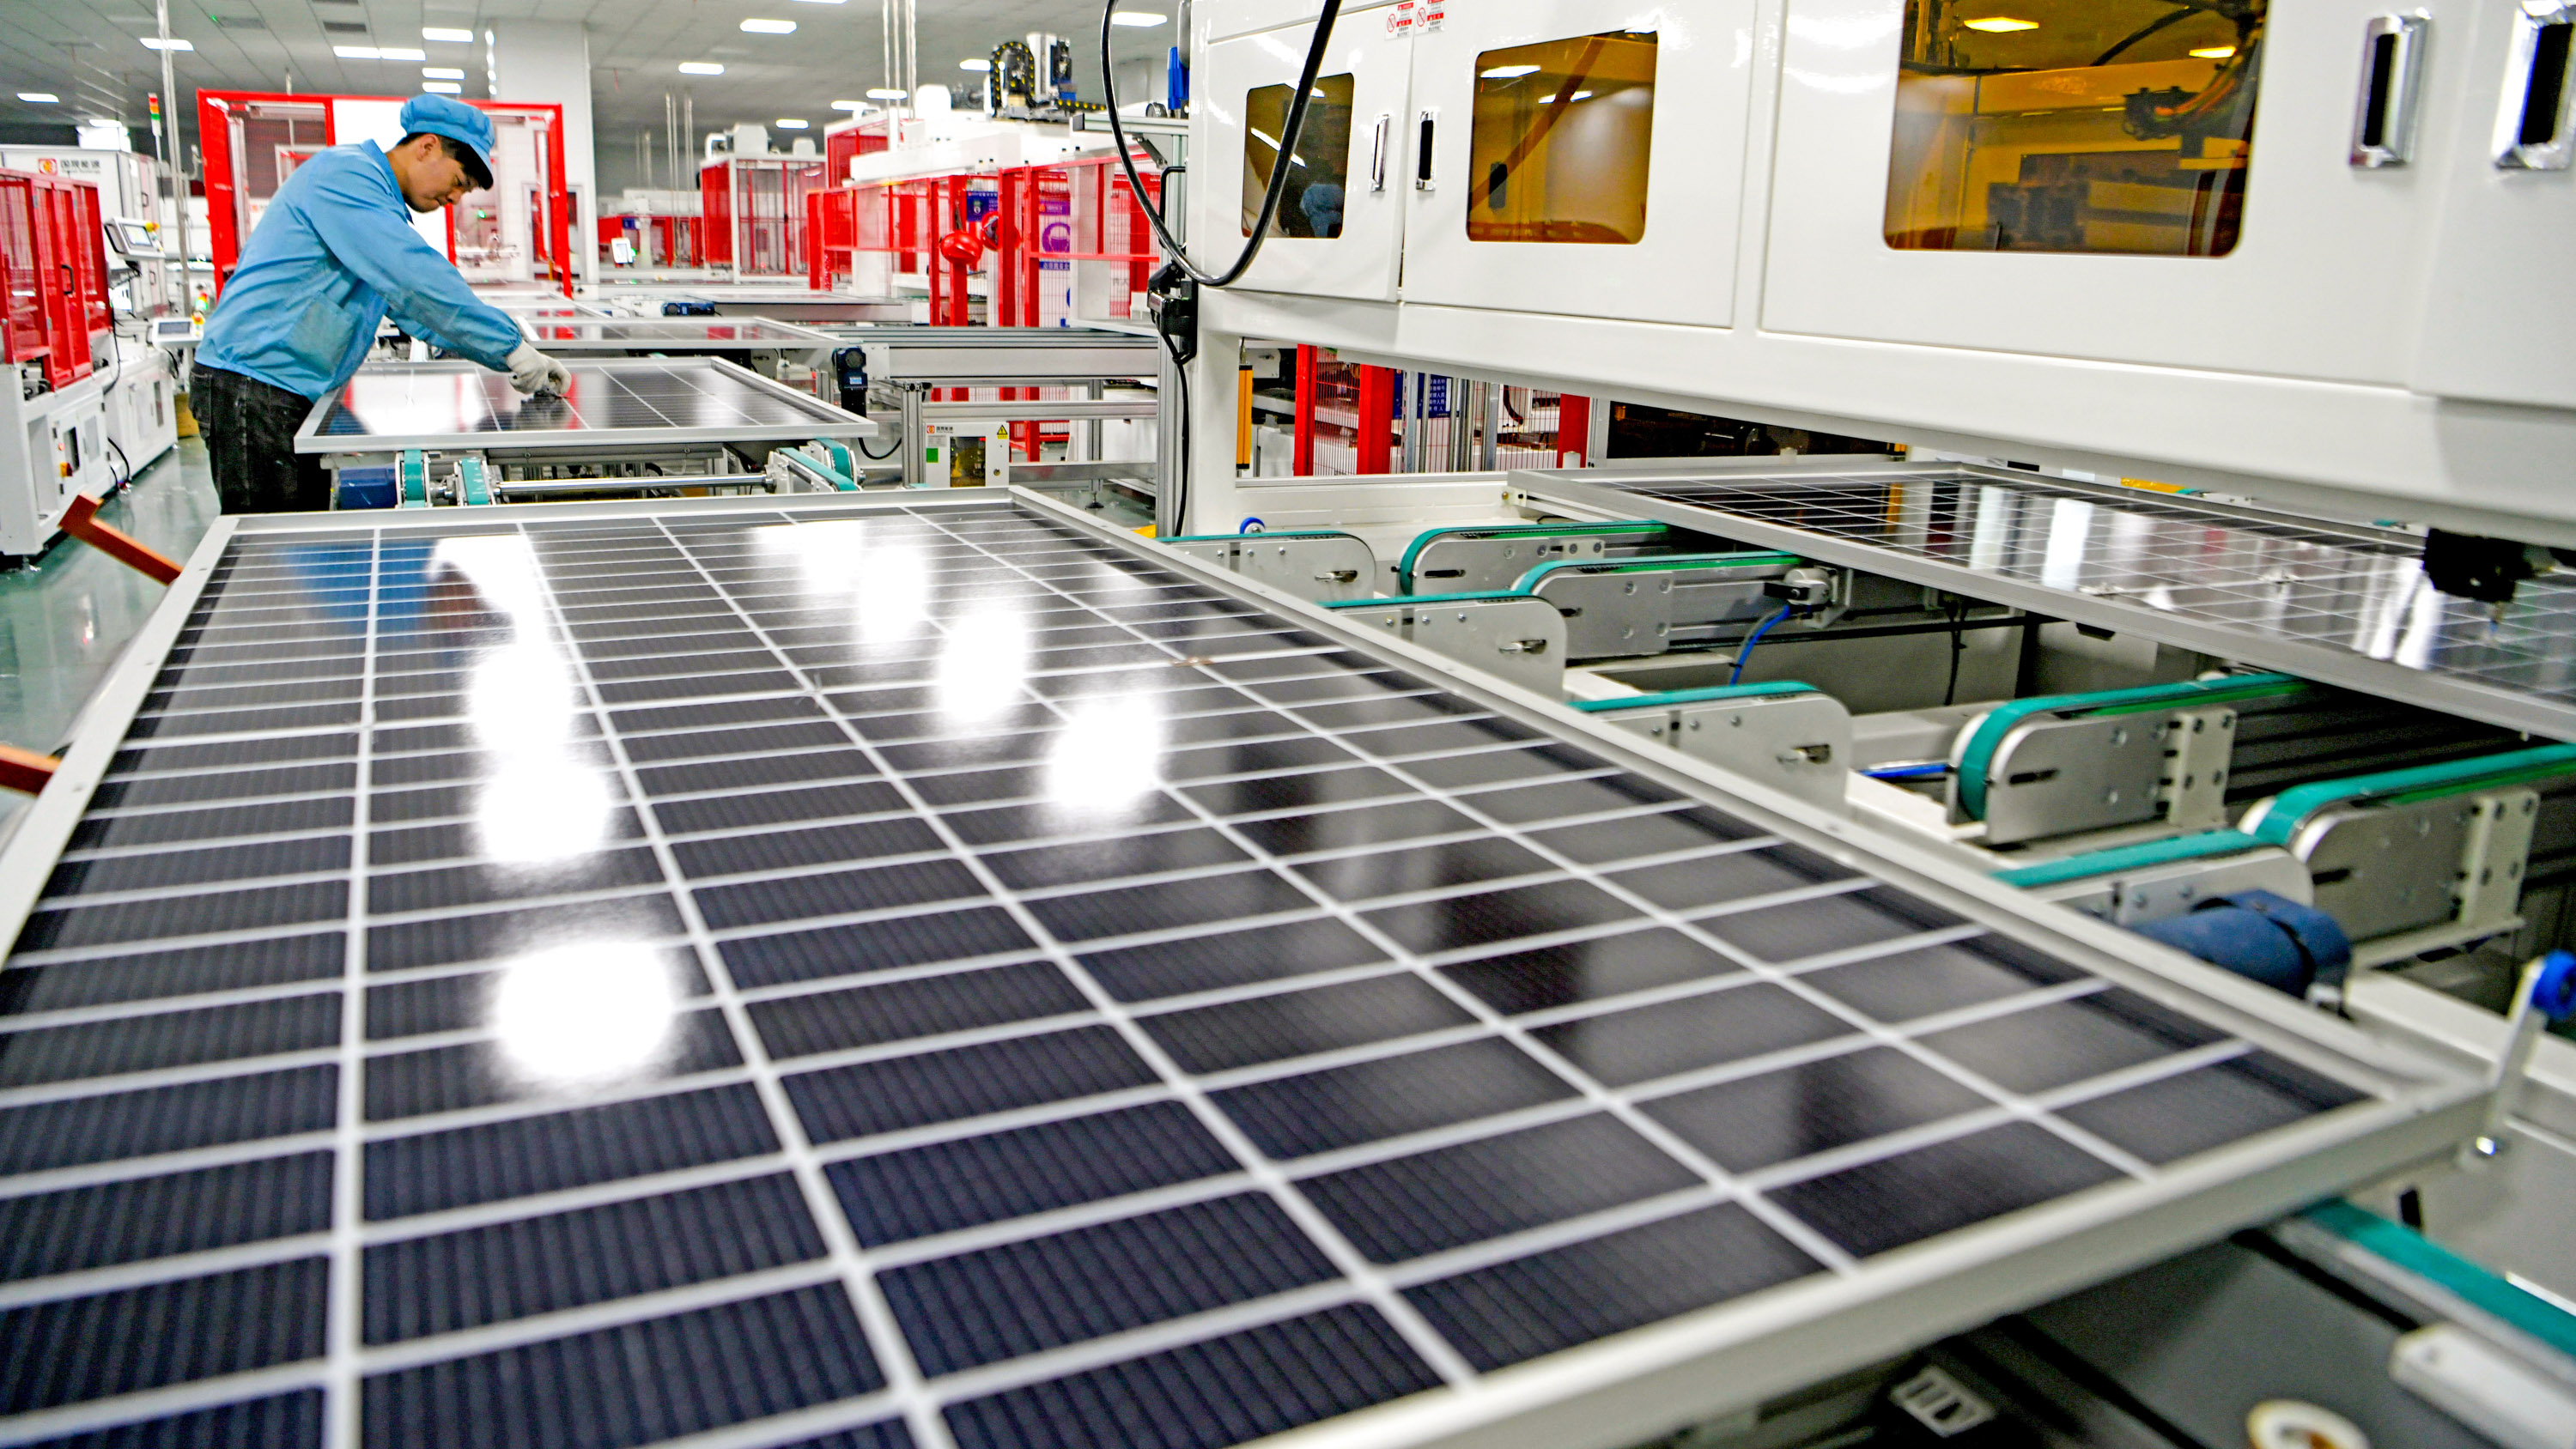 An employee works on the production line of solar panels in Huainan, China